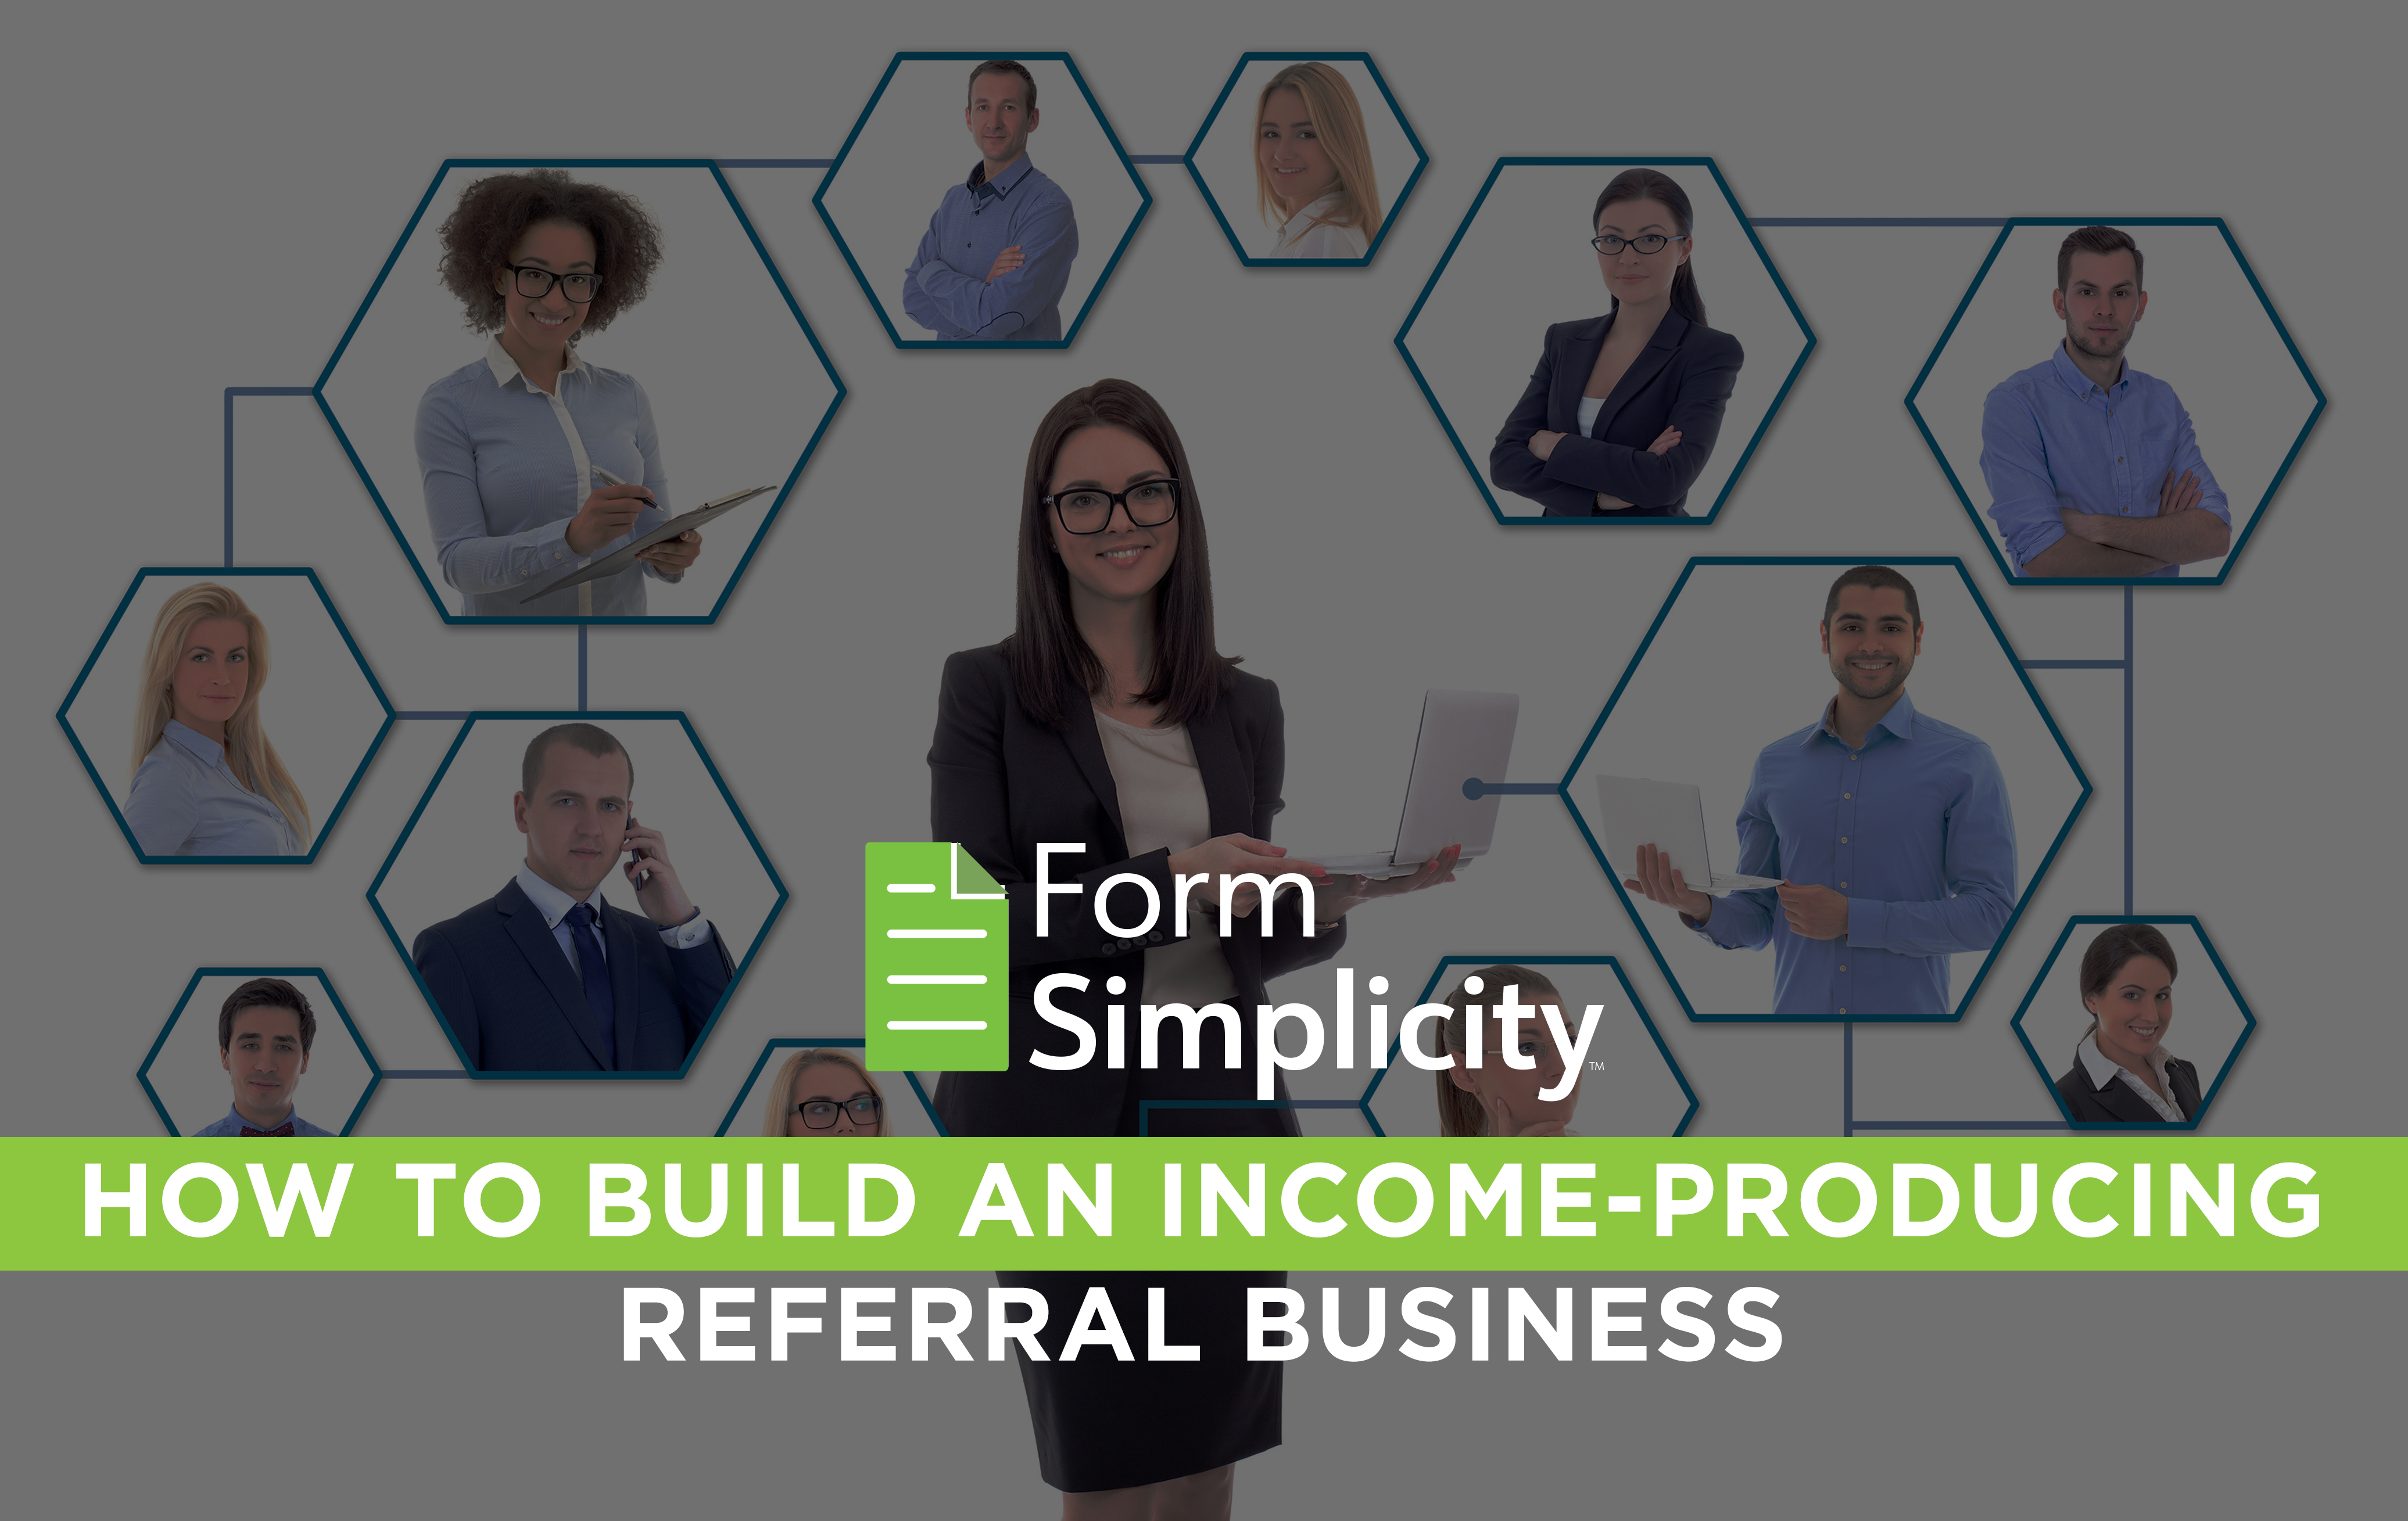 How to Build an Income-Producing Referral Business